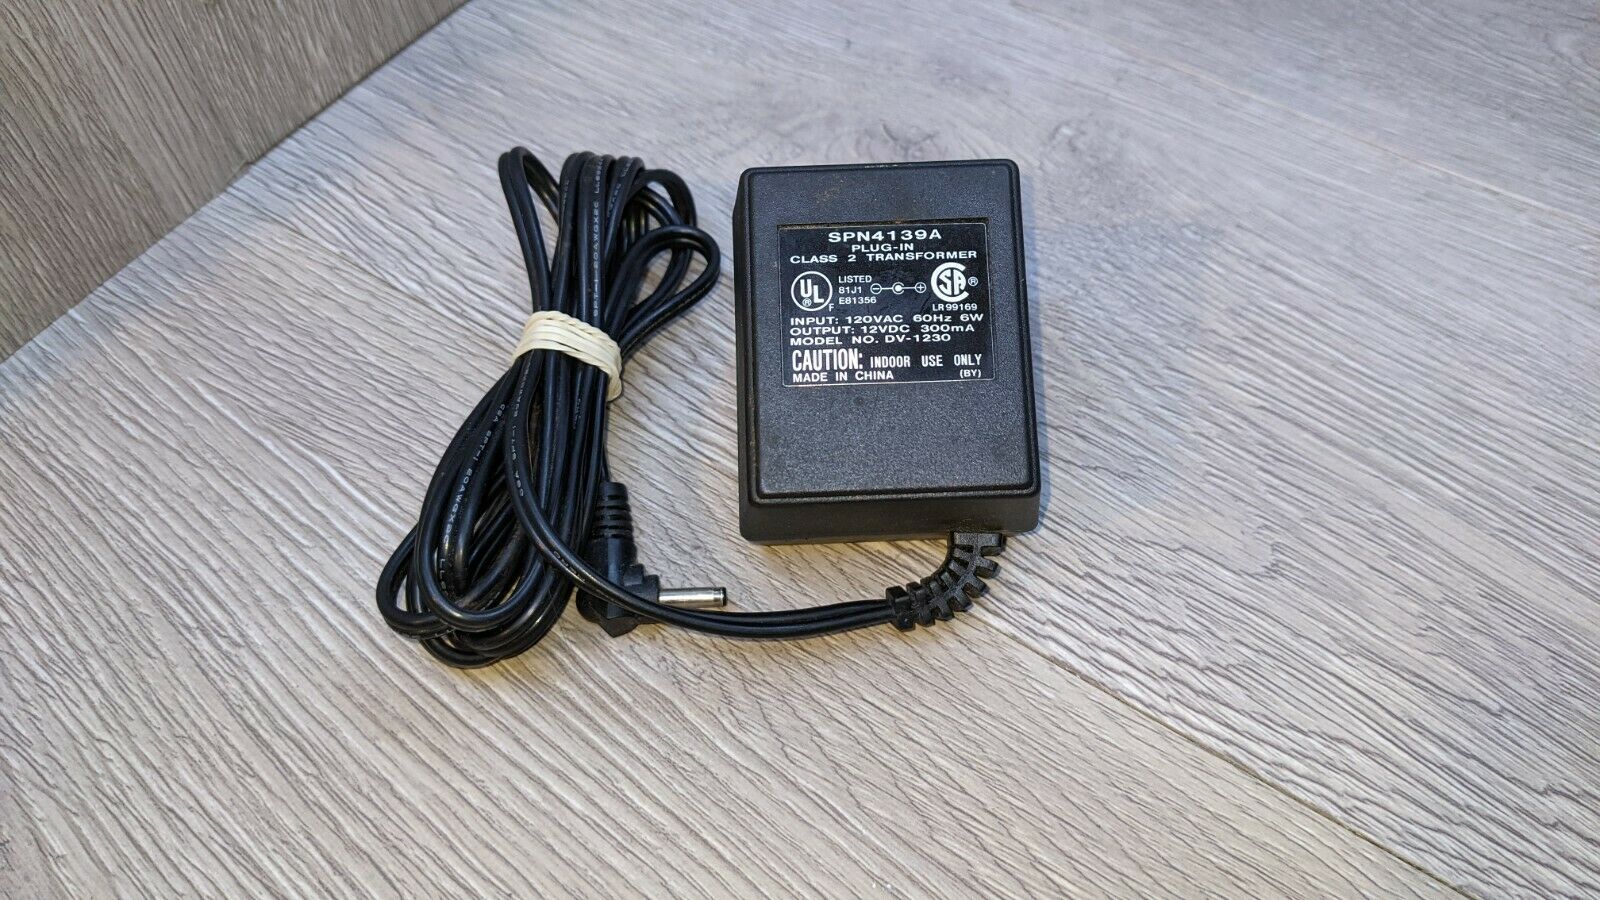 SPN 4139A AC to DC Power Supply Adaptor Charger 12V DC 300mA Model AD-1230 Connection Split/Duplication: 1:2 Type: